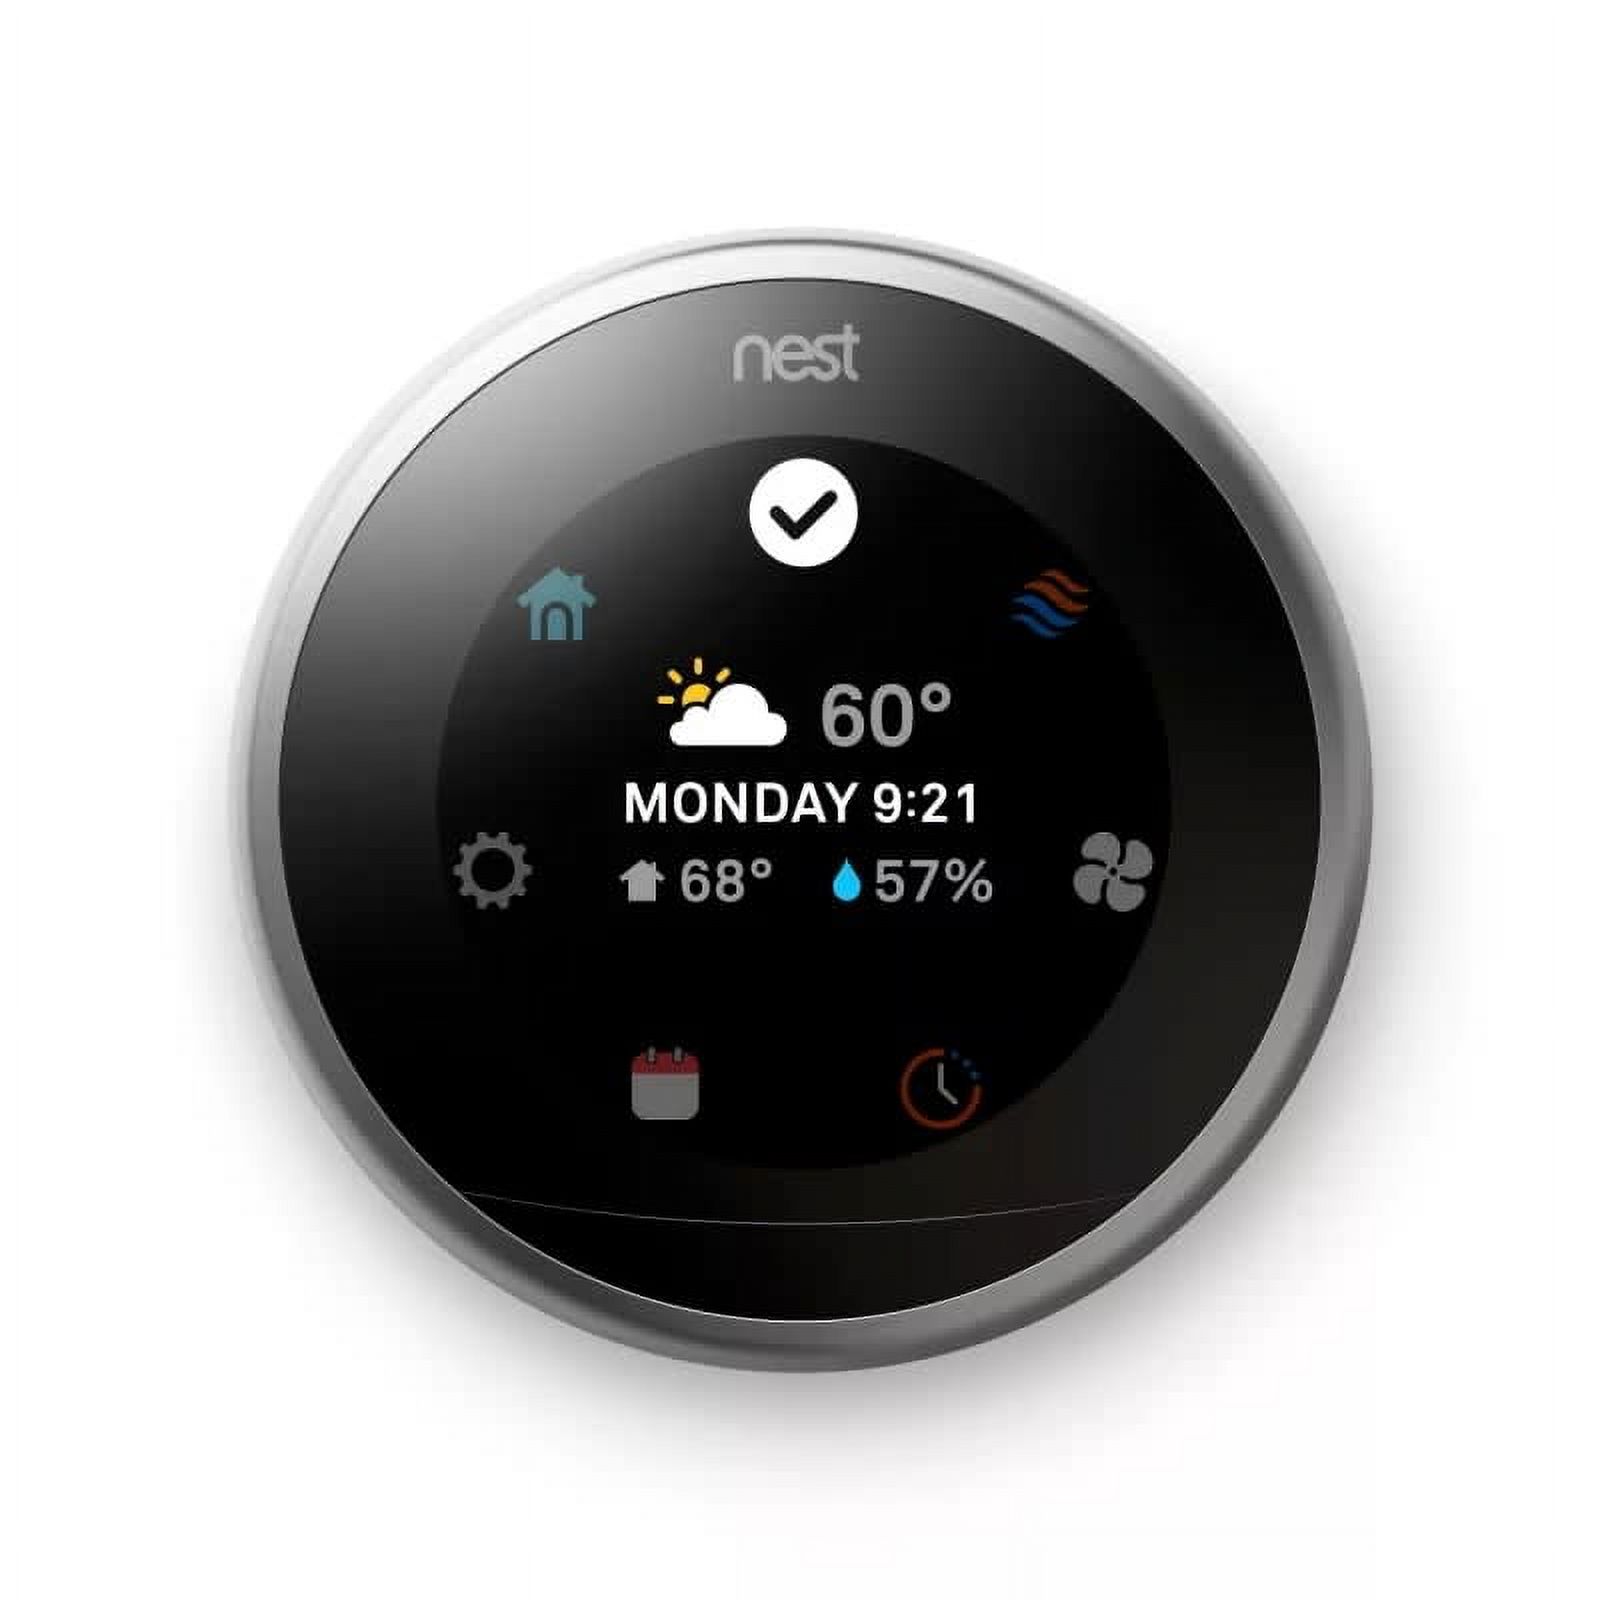 Google Nest 3rd Gen. Thermostat (Stainless Steel) - image 2 of 4